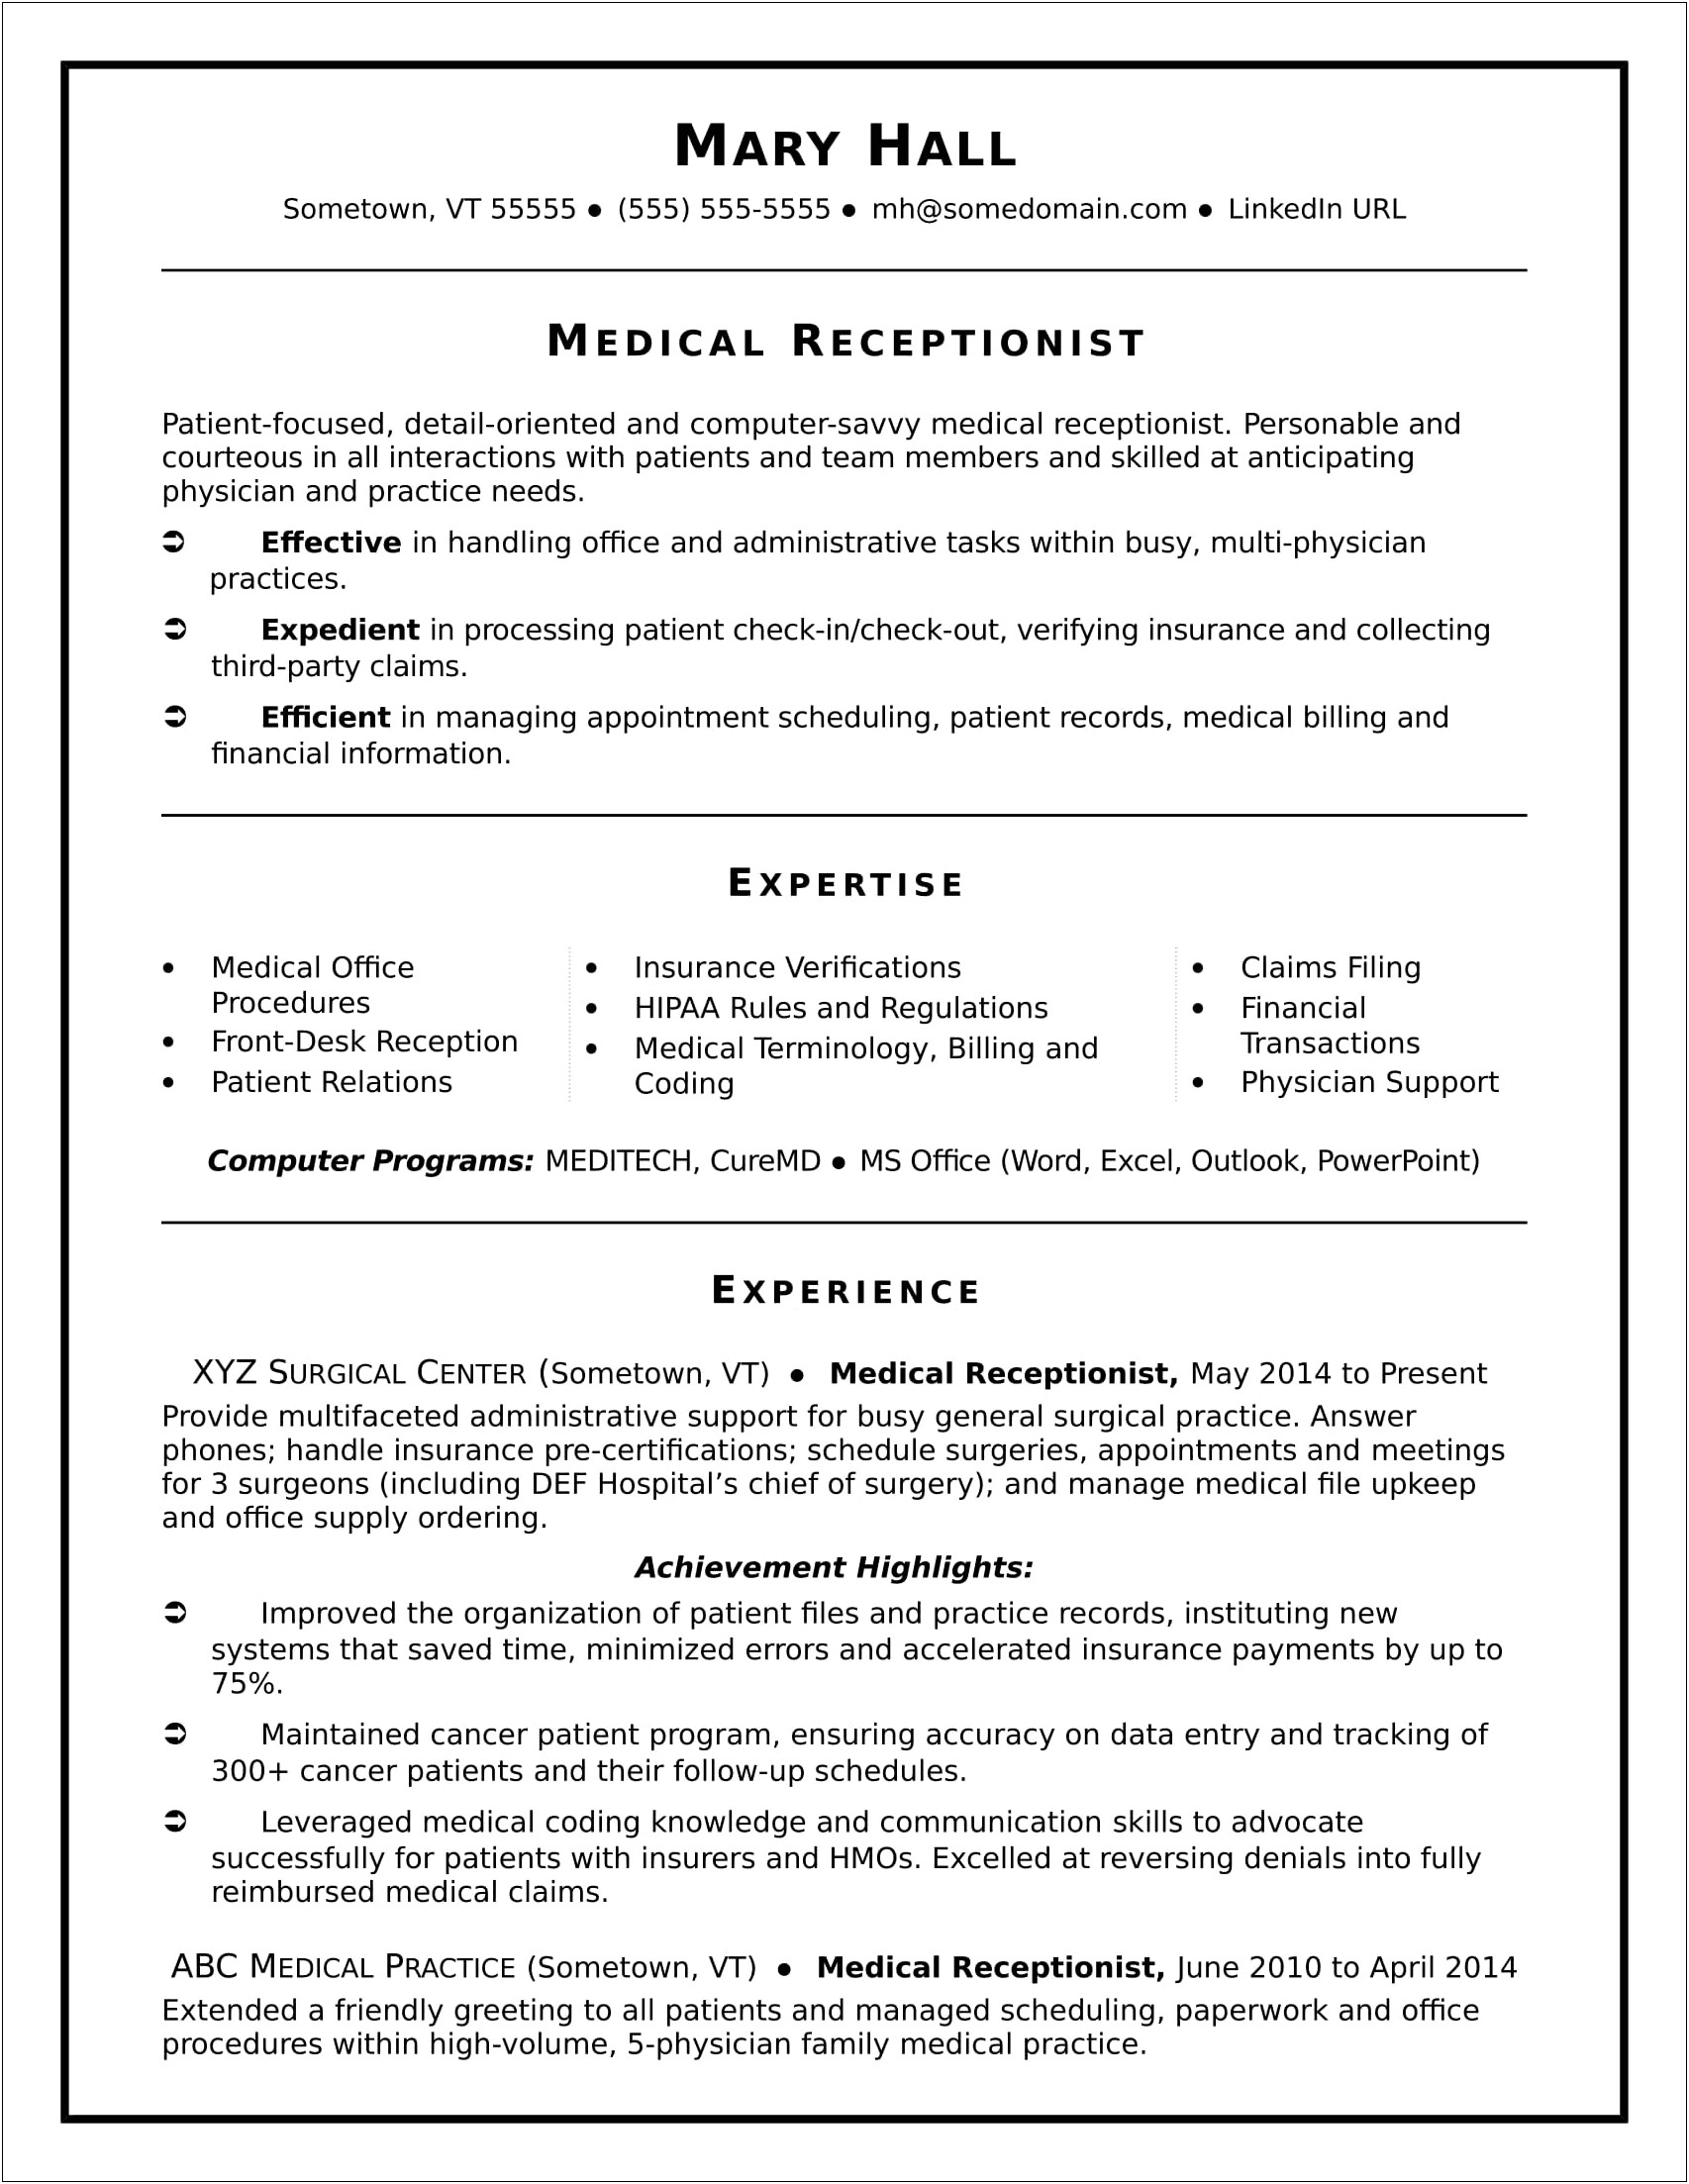 Sample Resume For Healthcare Administrative Assistant